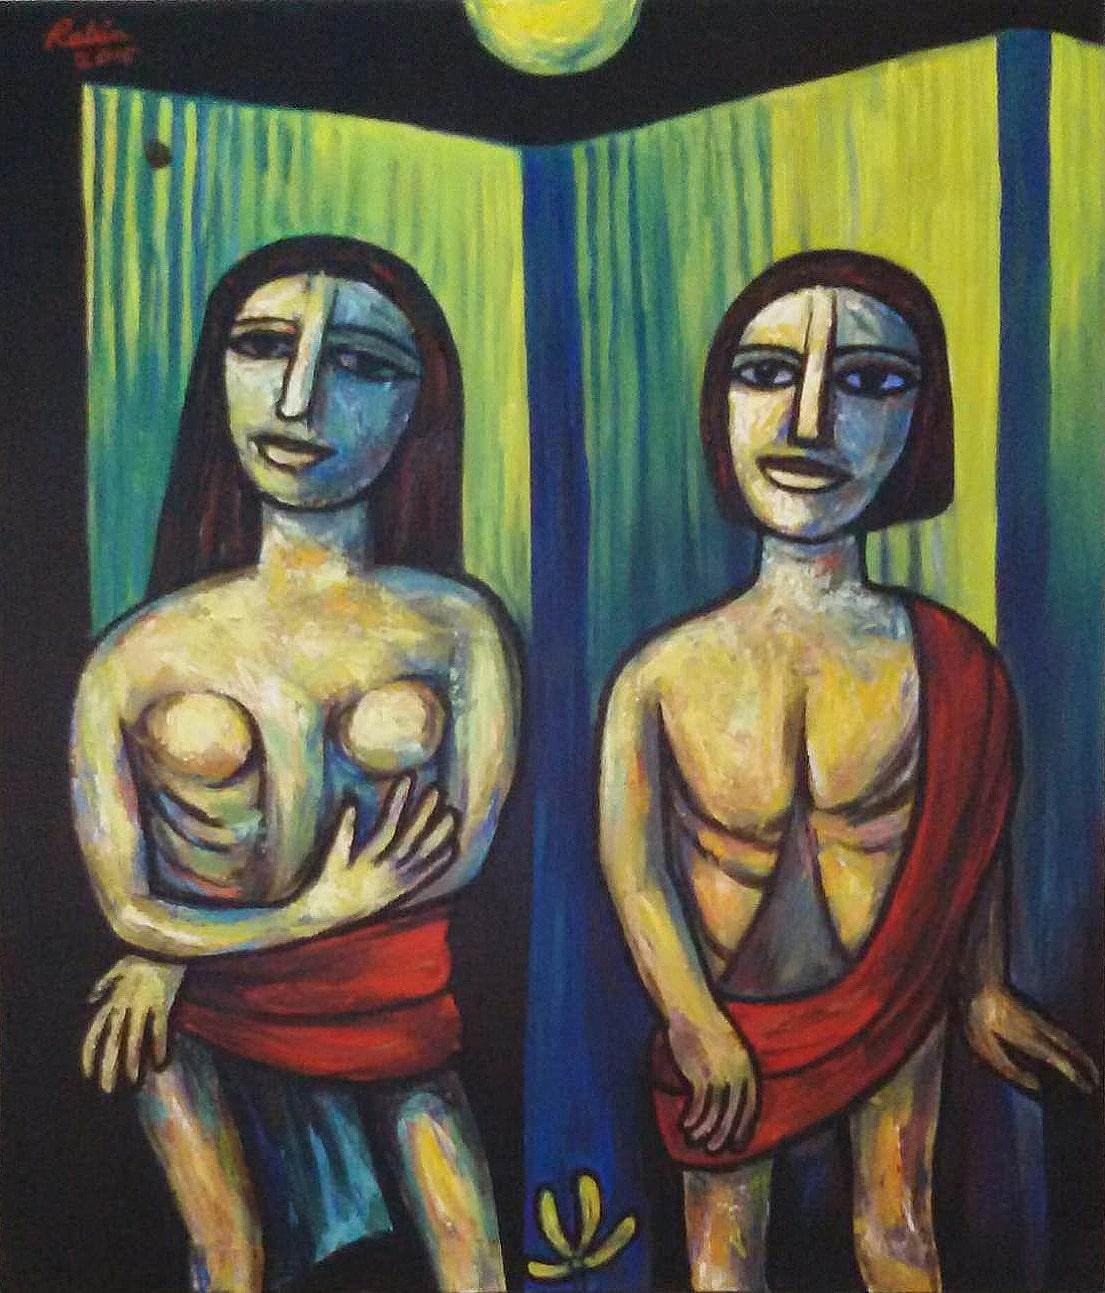 Rabin Mondal Figurative Painting - Couple, Oil & Acrylic on Canvas by Modern Indian Artist “In Stock”